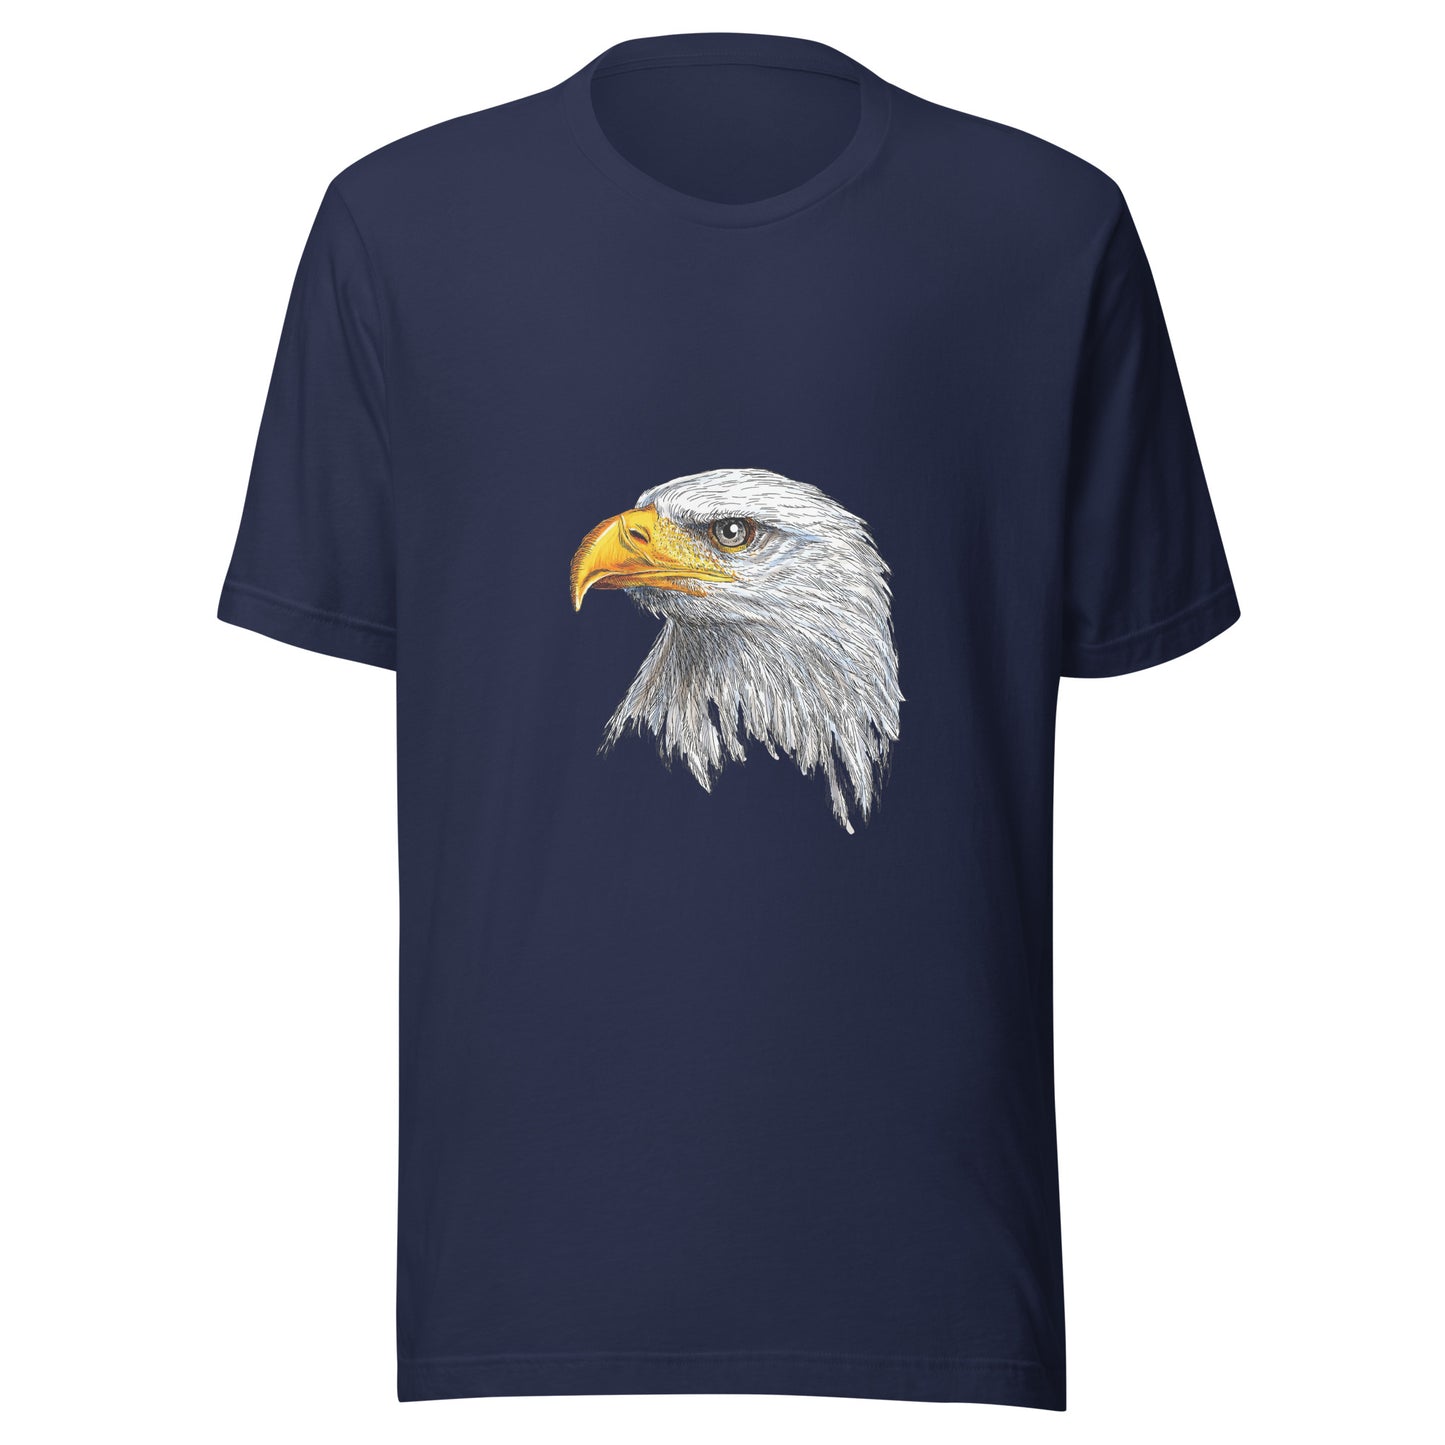 Women and Men's (Unisex) T-Shirt Printed with a Portrait of a Bald Eagle